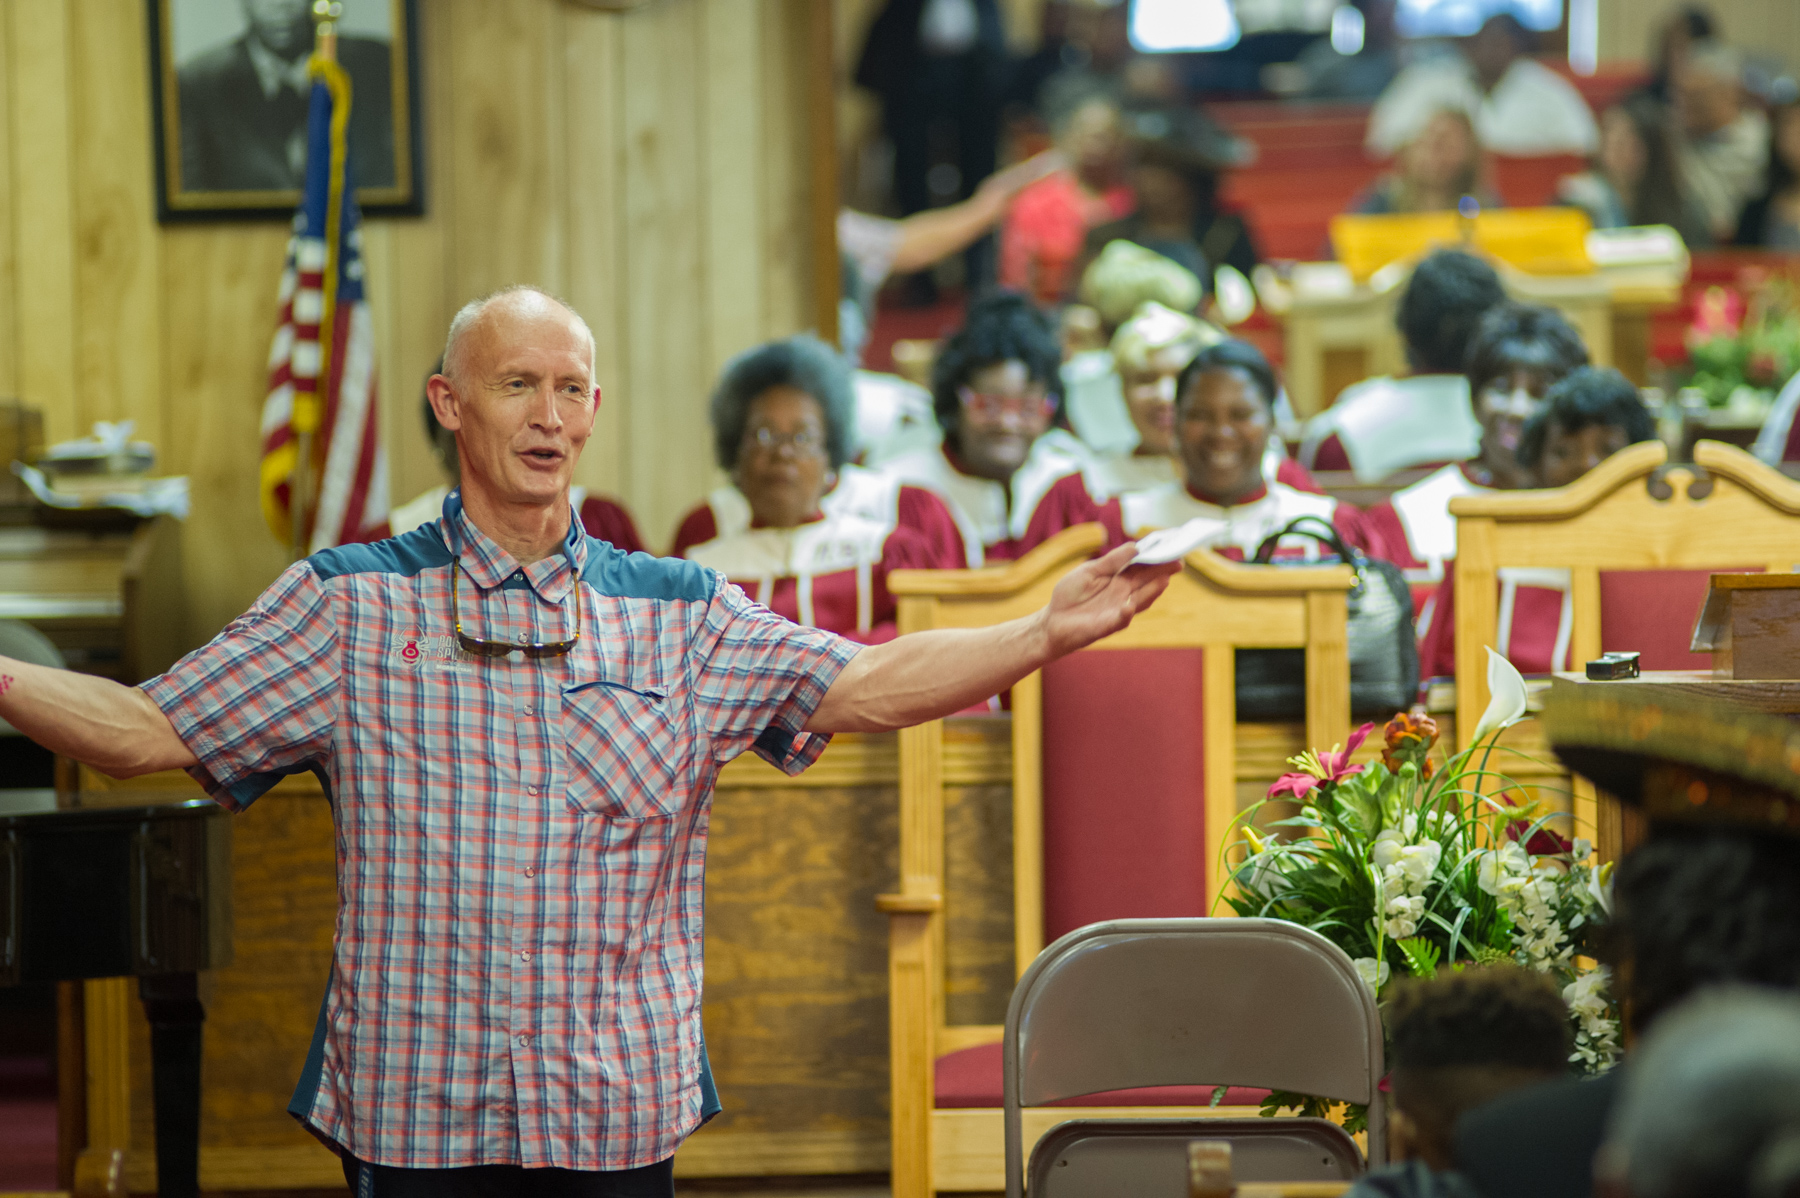  Anders Roddar thanks the congregation at New Bethel Missionary Baptist Church in Clarksdale for their hospitality. 